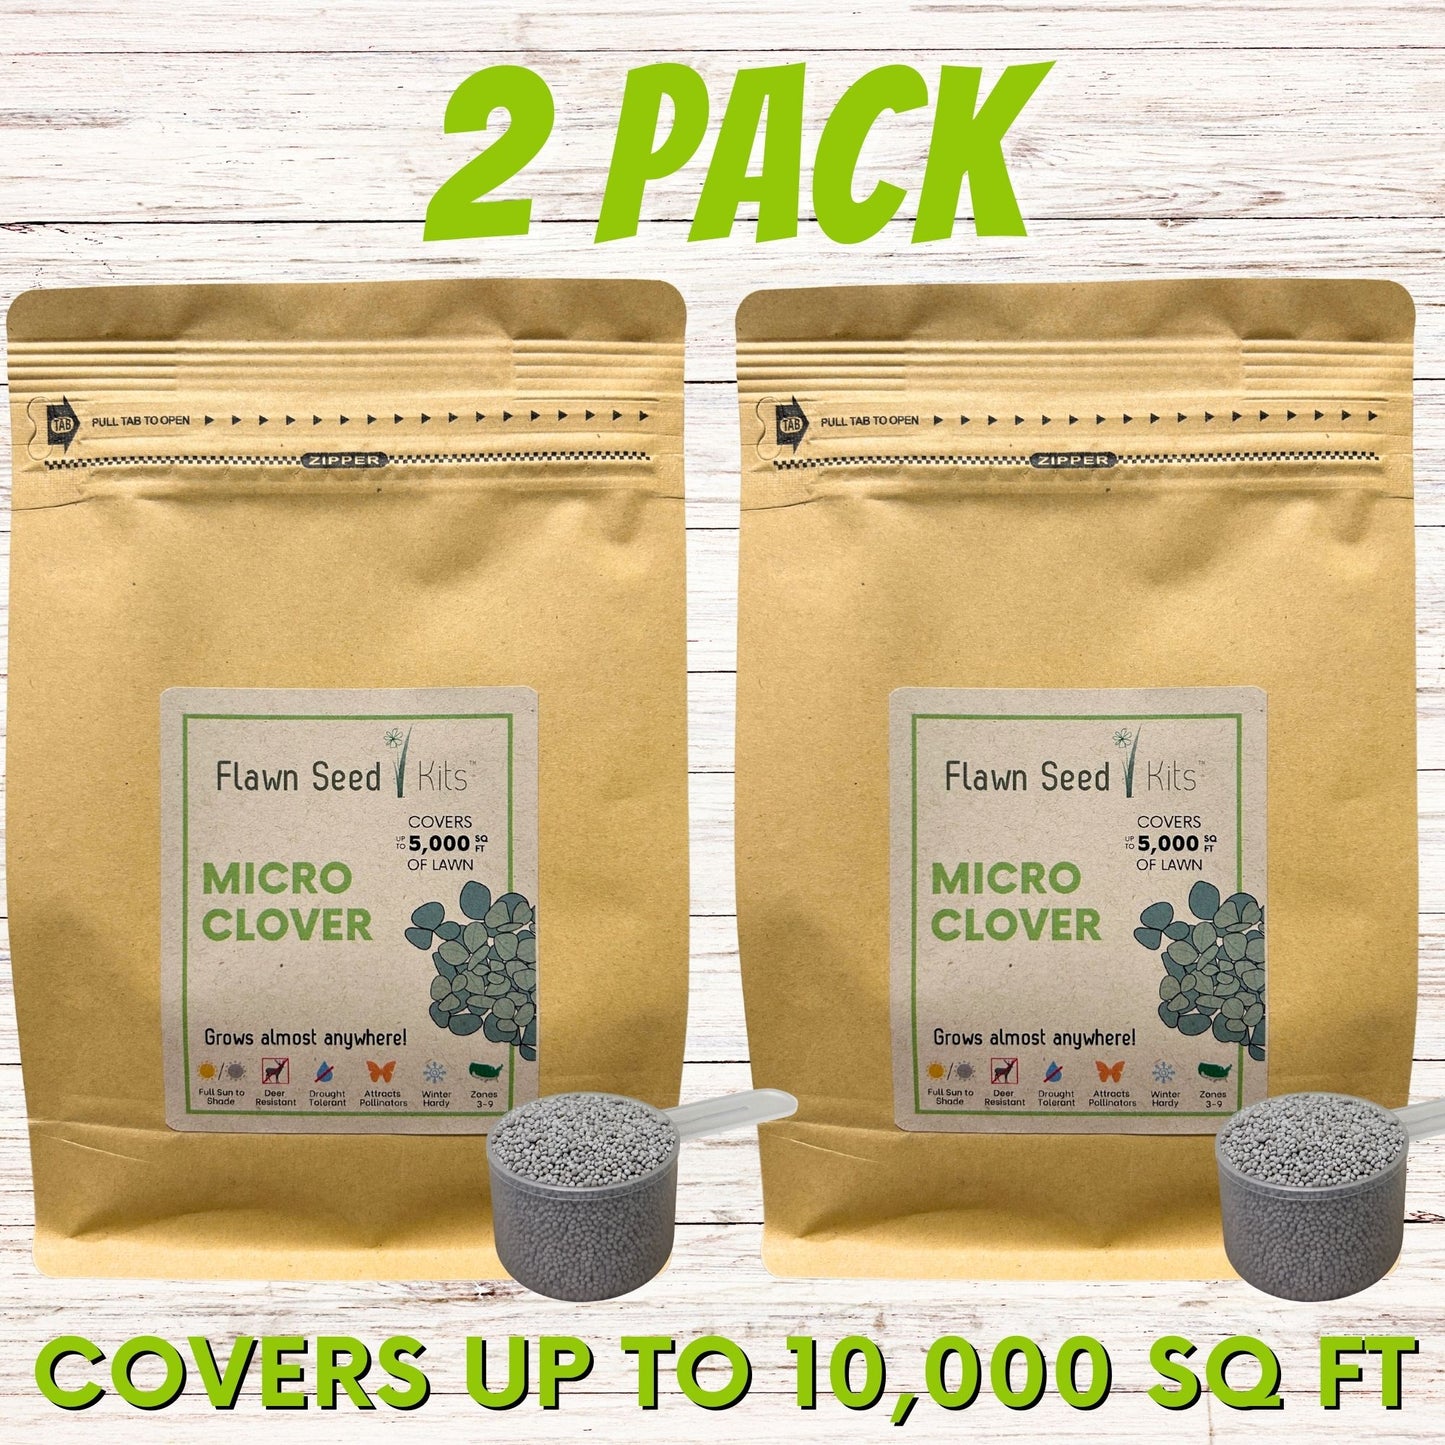 Micro Clover Seed Pouch